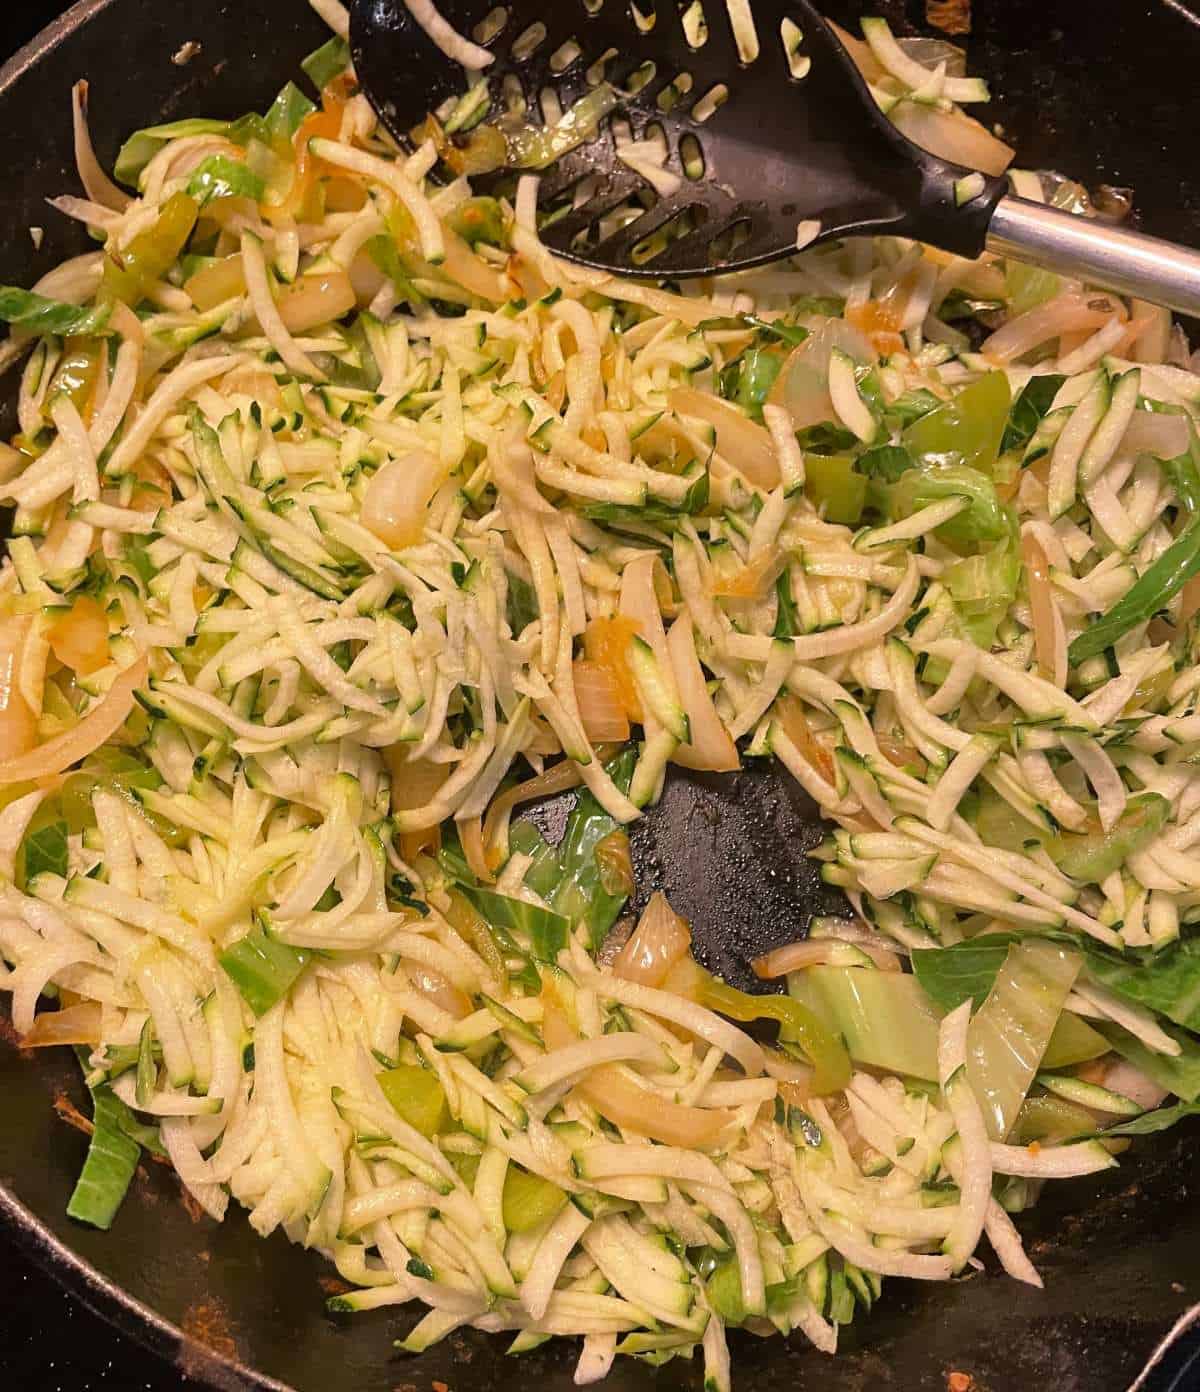 shredded zucchini and cabbage being sautéed in a skillet with onions.